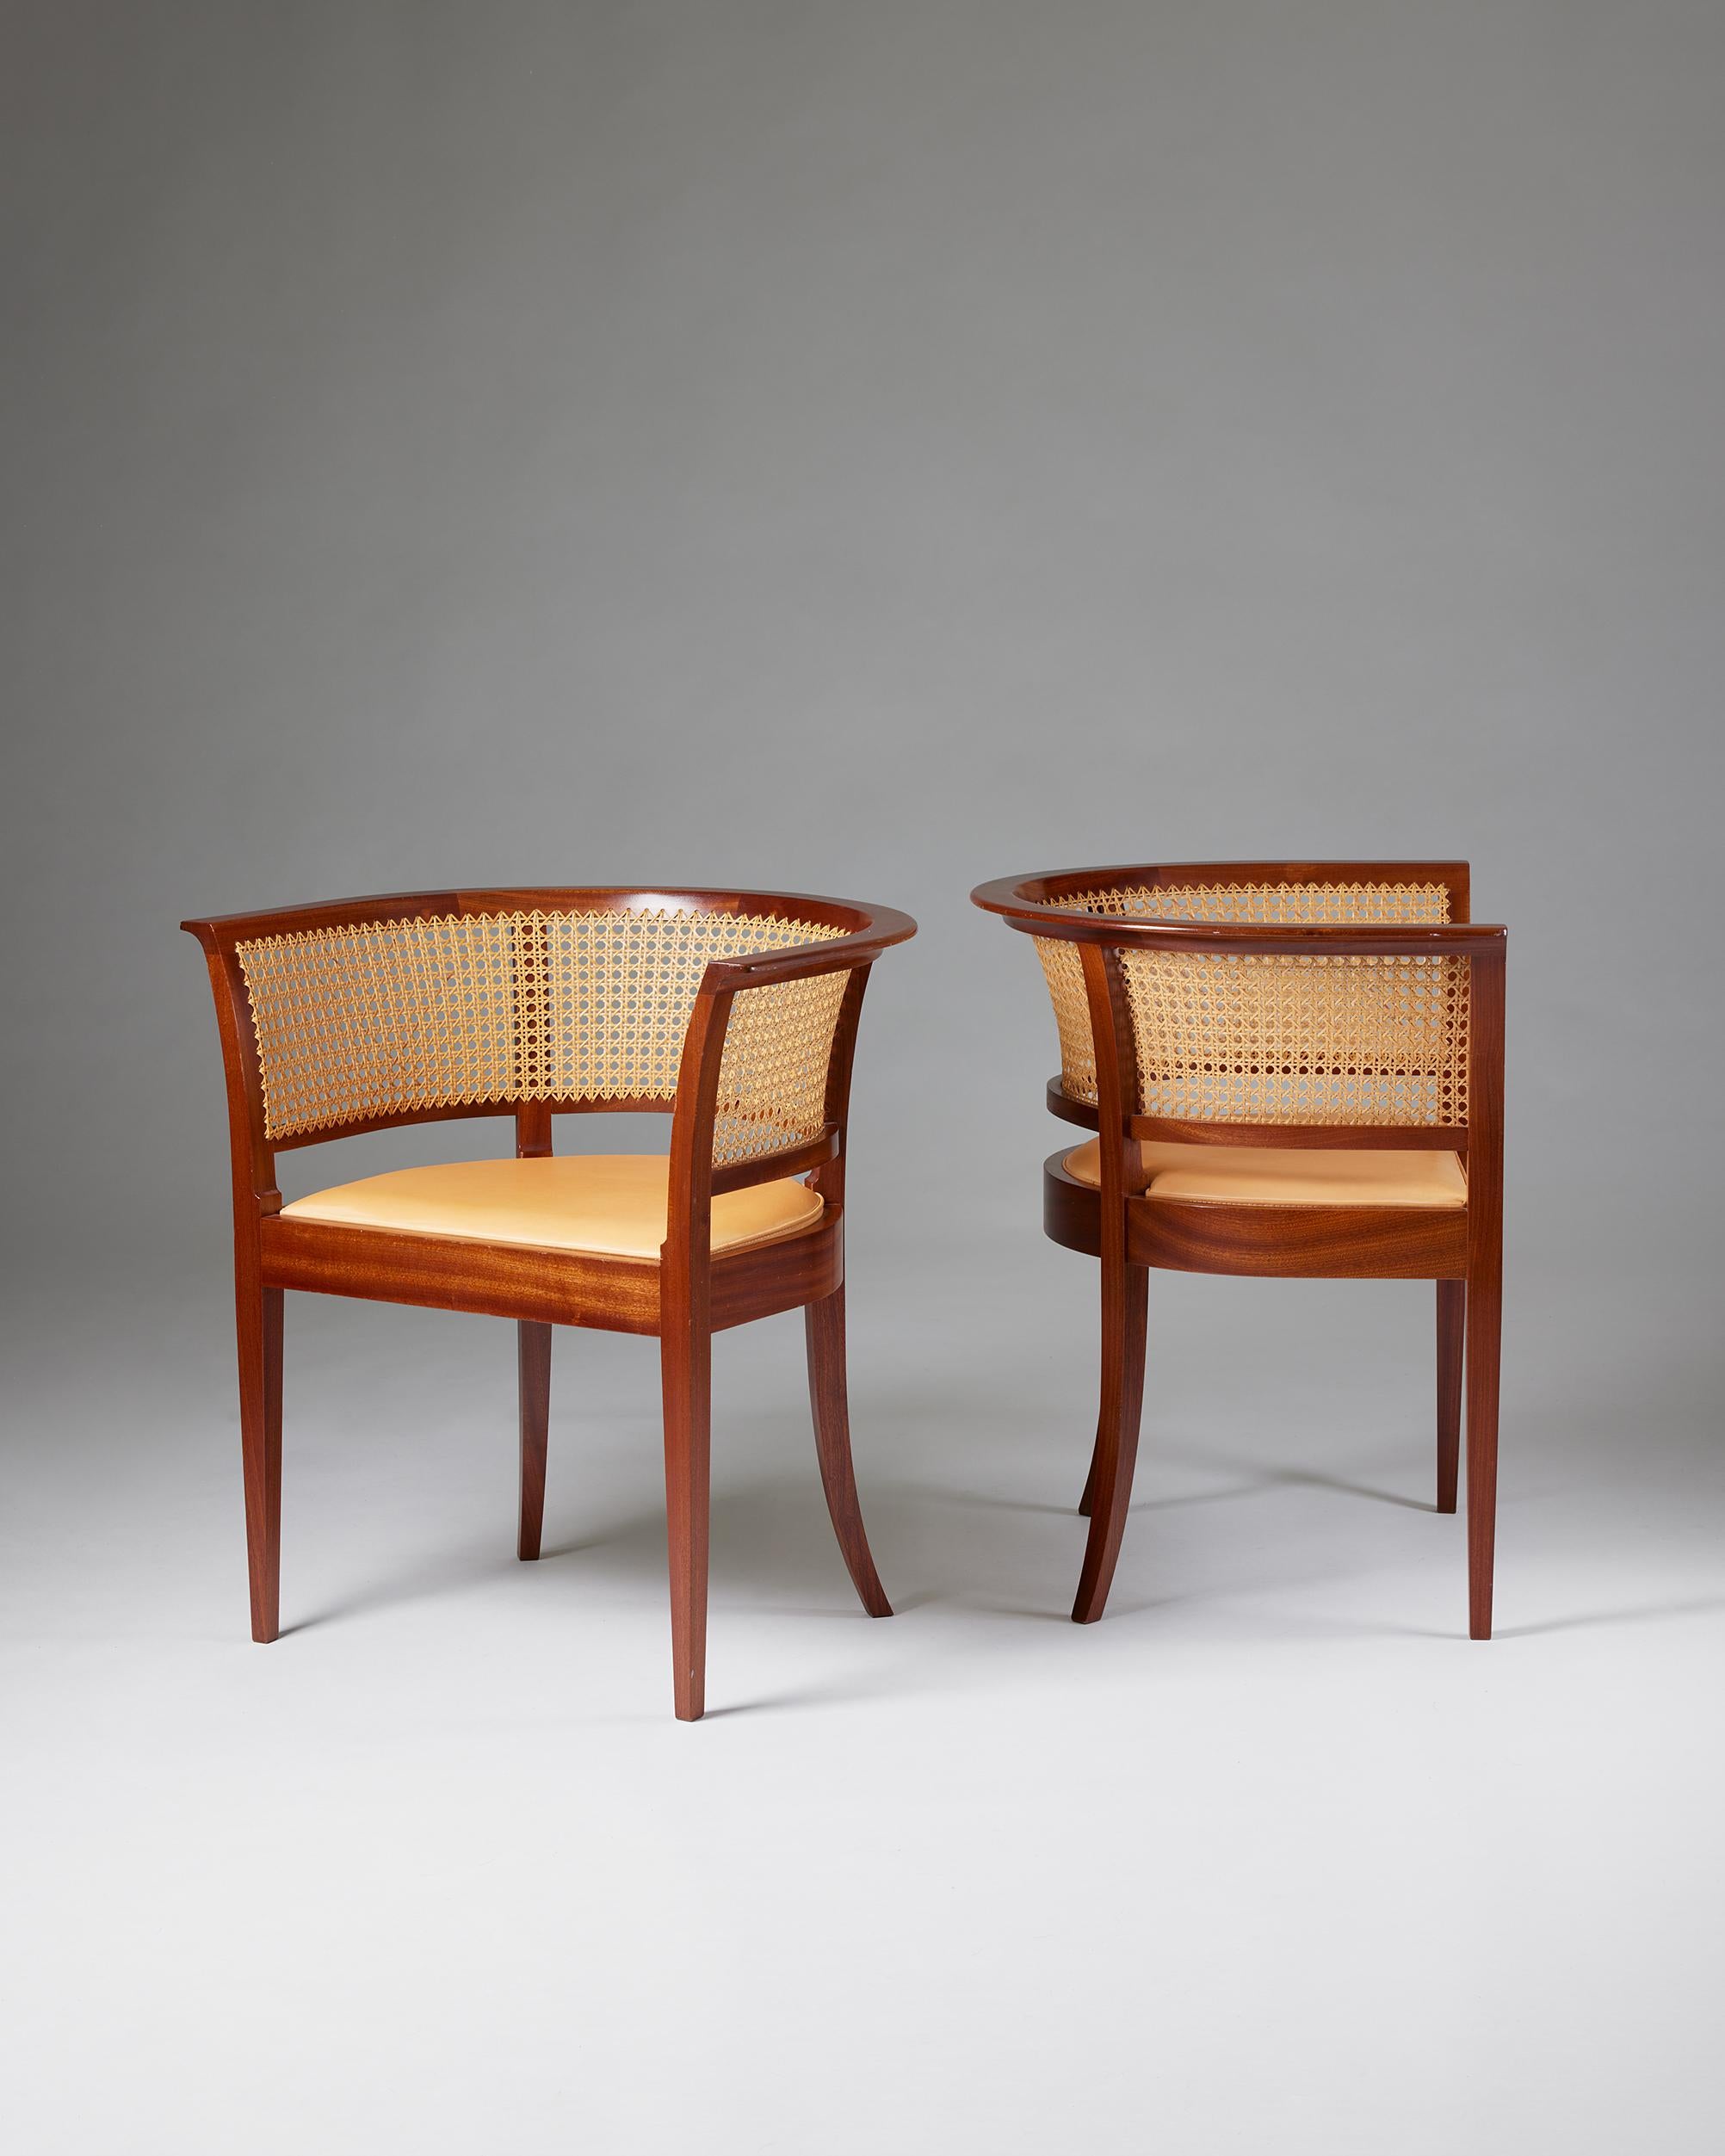 Leather ‘The Faaborg Chair’ designed by Kaare Klint for Rud. Rasmussen Cabinetmakers For Sale